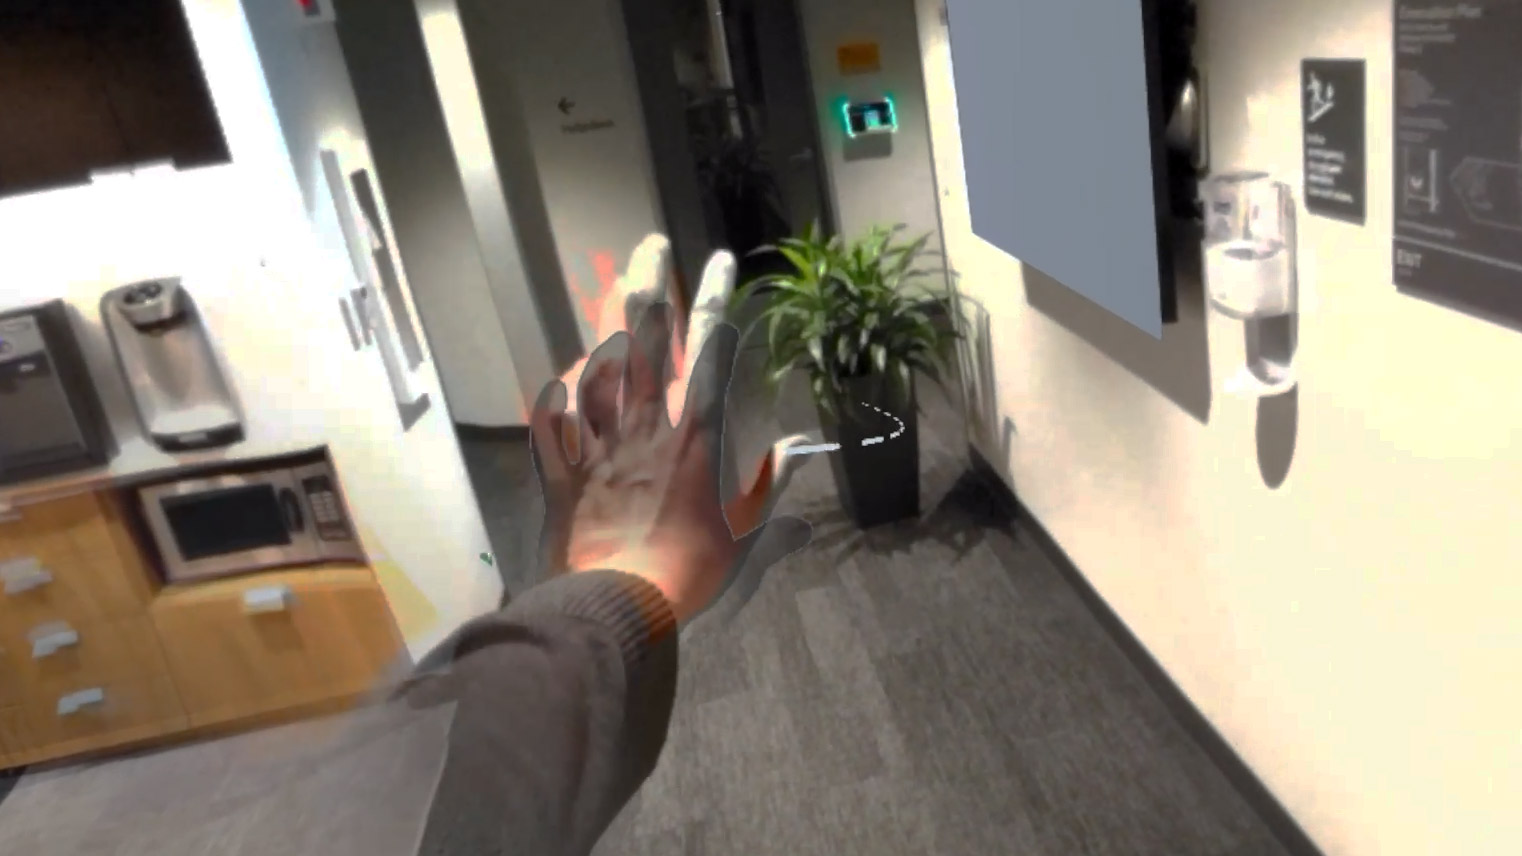 Meta Reality Labs Research Shows Mind-bending AR Capabilities